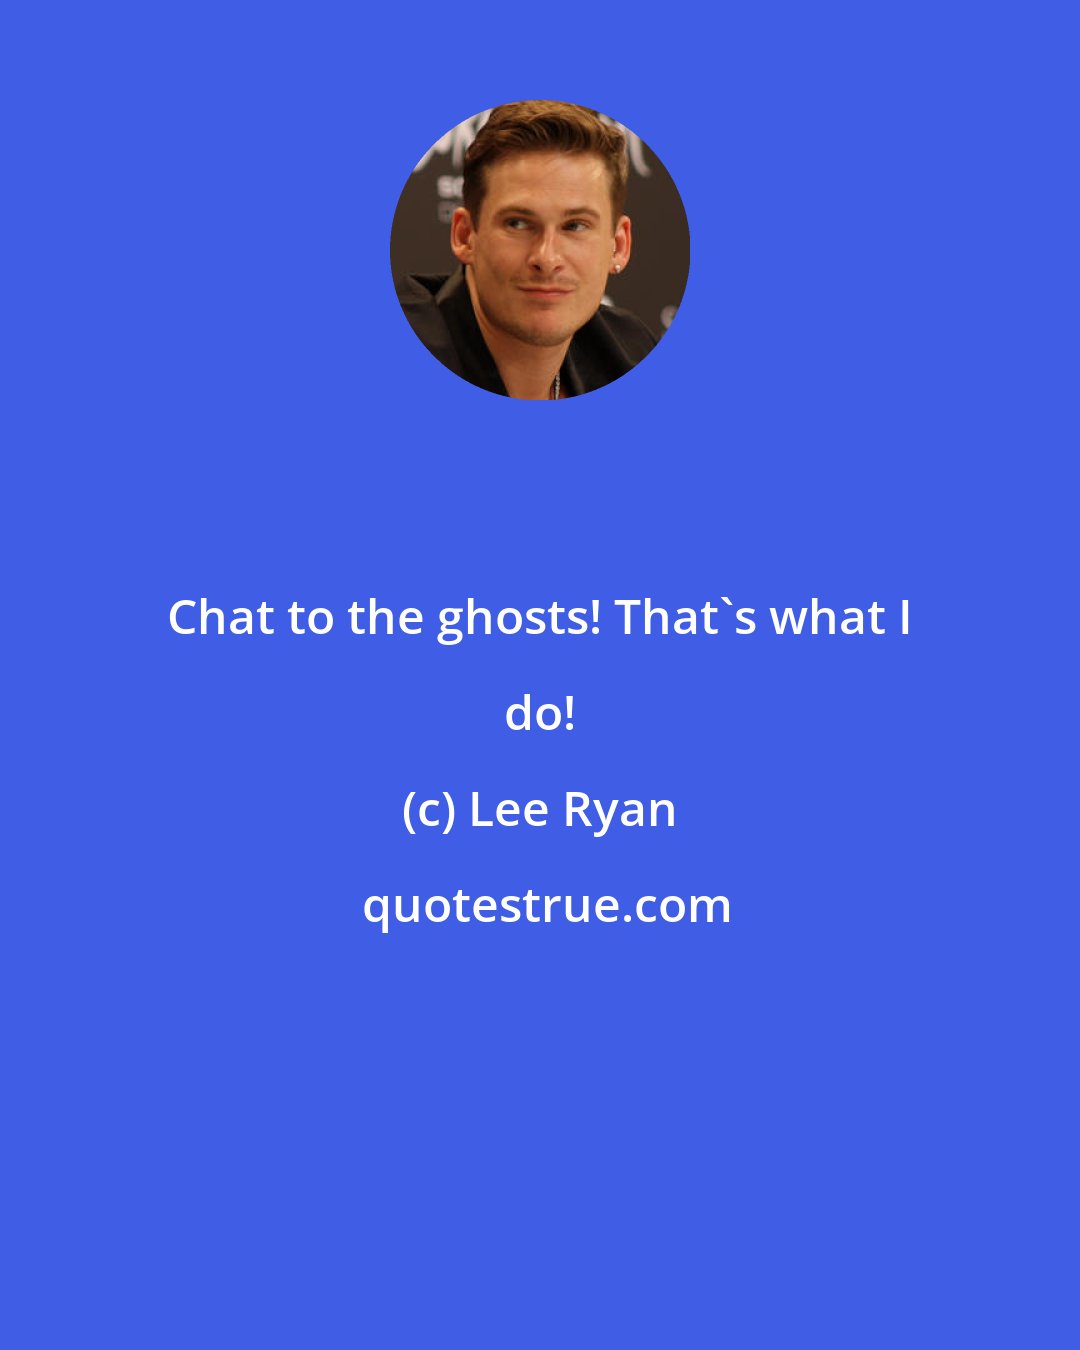 Lee Ryan: Chat to the ghosts! That's what I do!